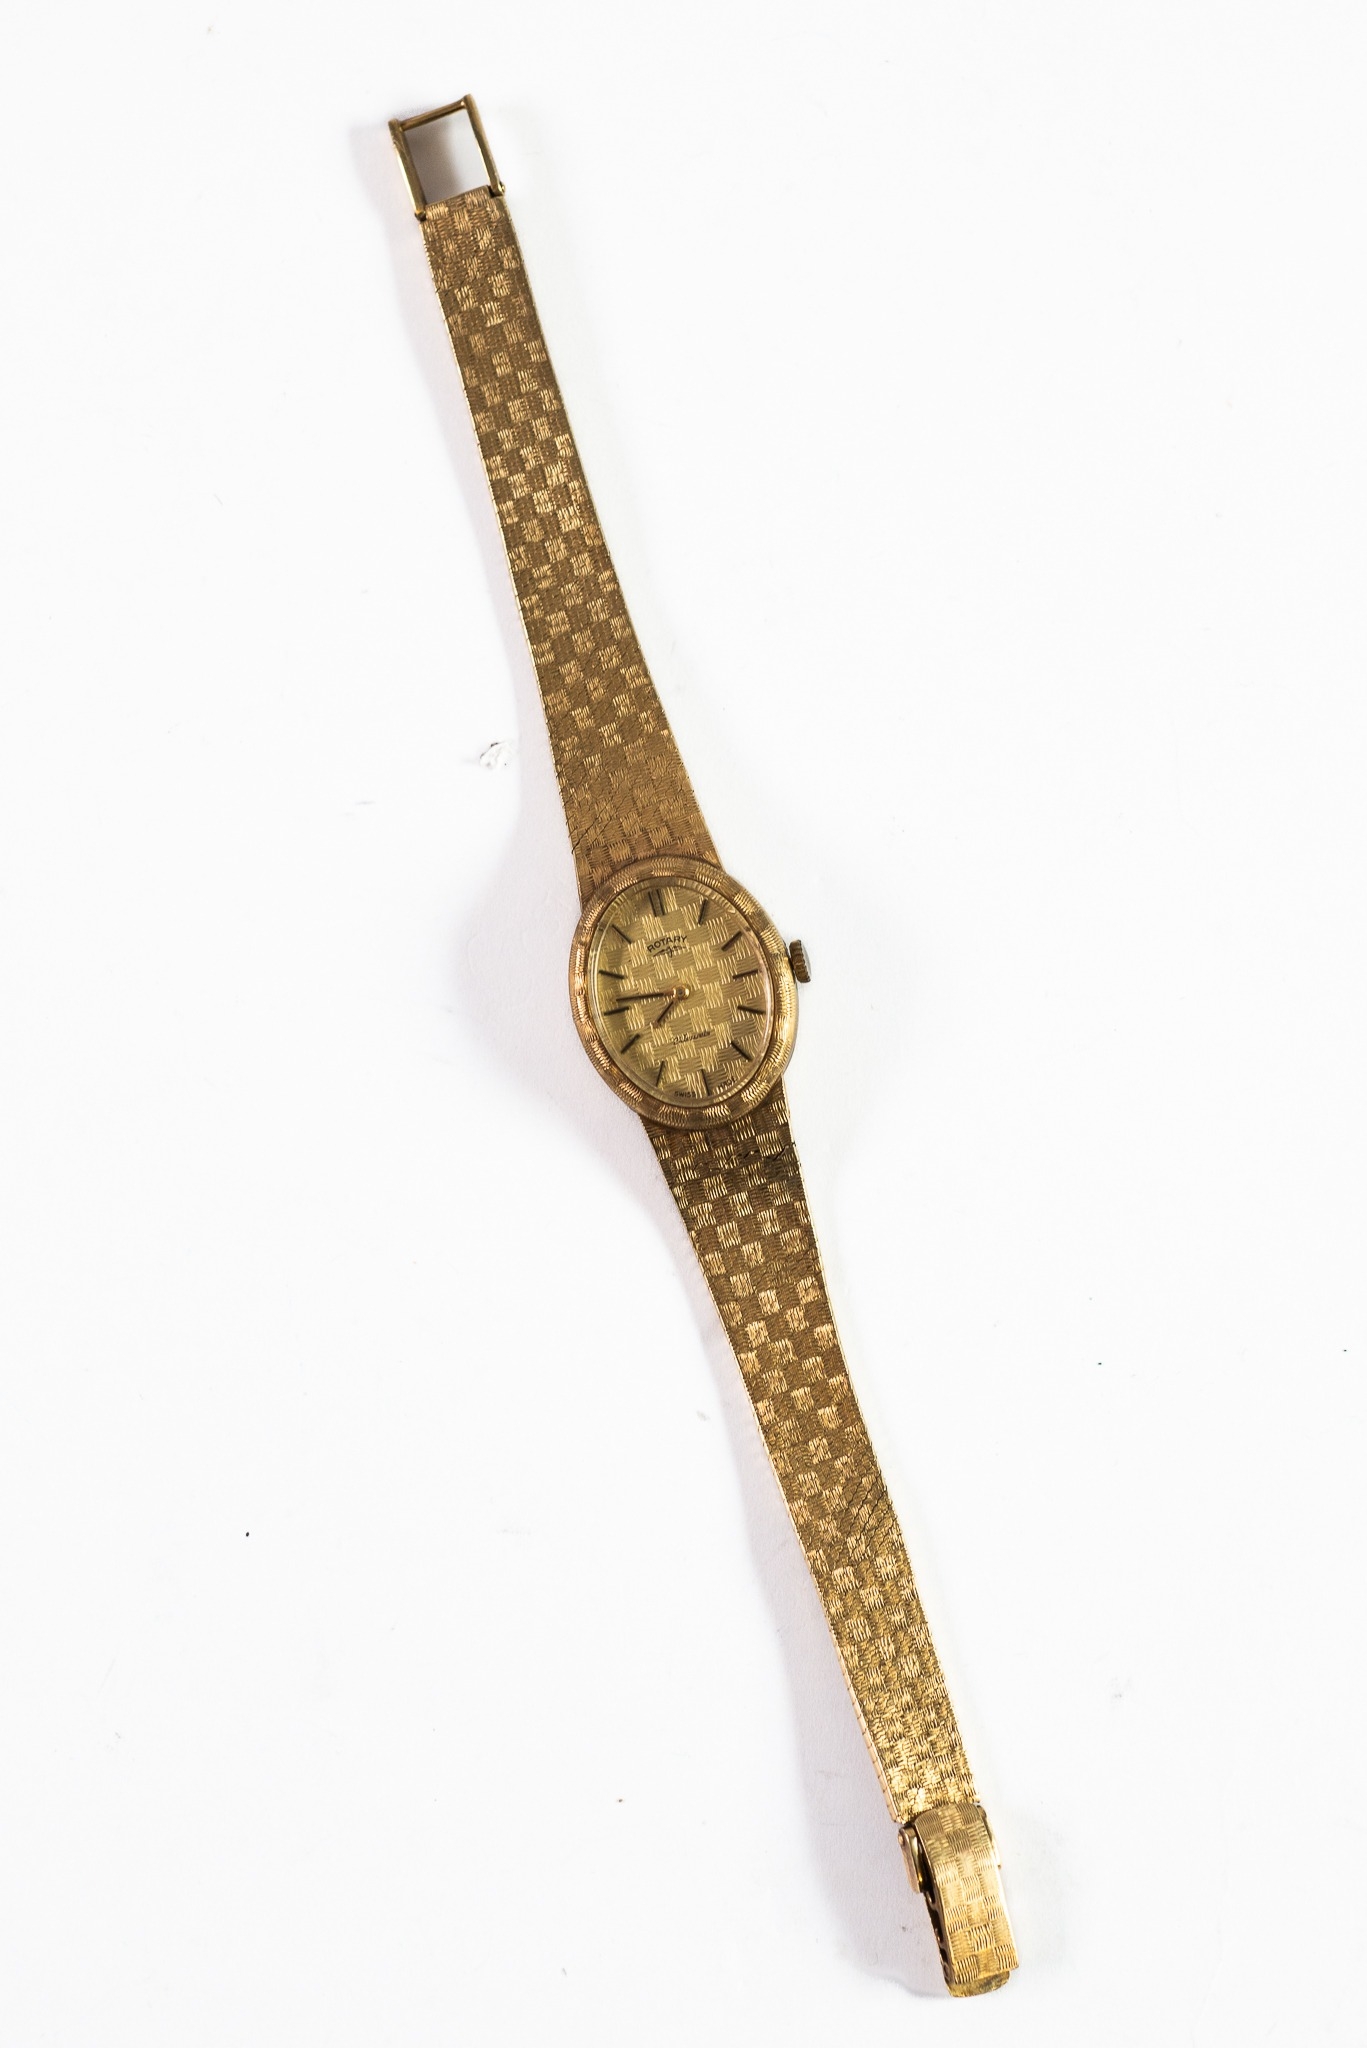 LADY'S ROTARY, SWISS, 9ct GOLD BRACELET WATCH with 21 jewel movement, gold oval dial with batons,